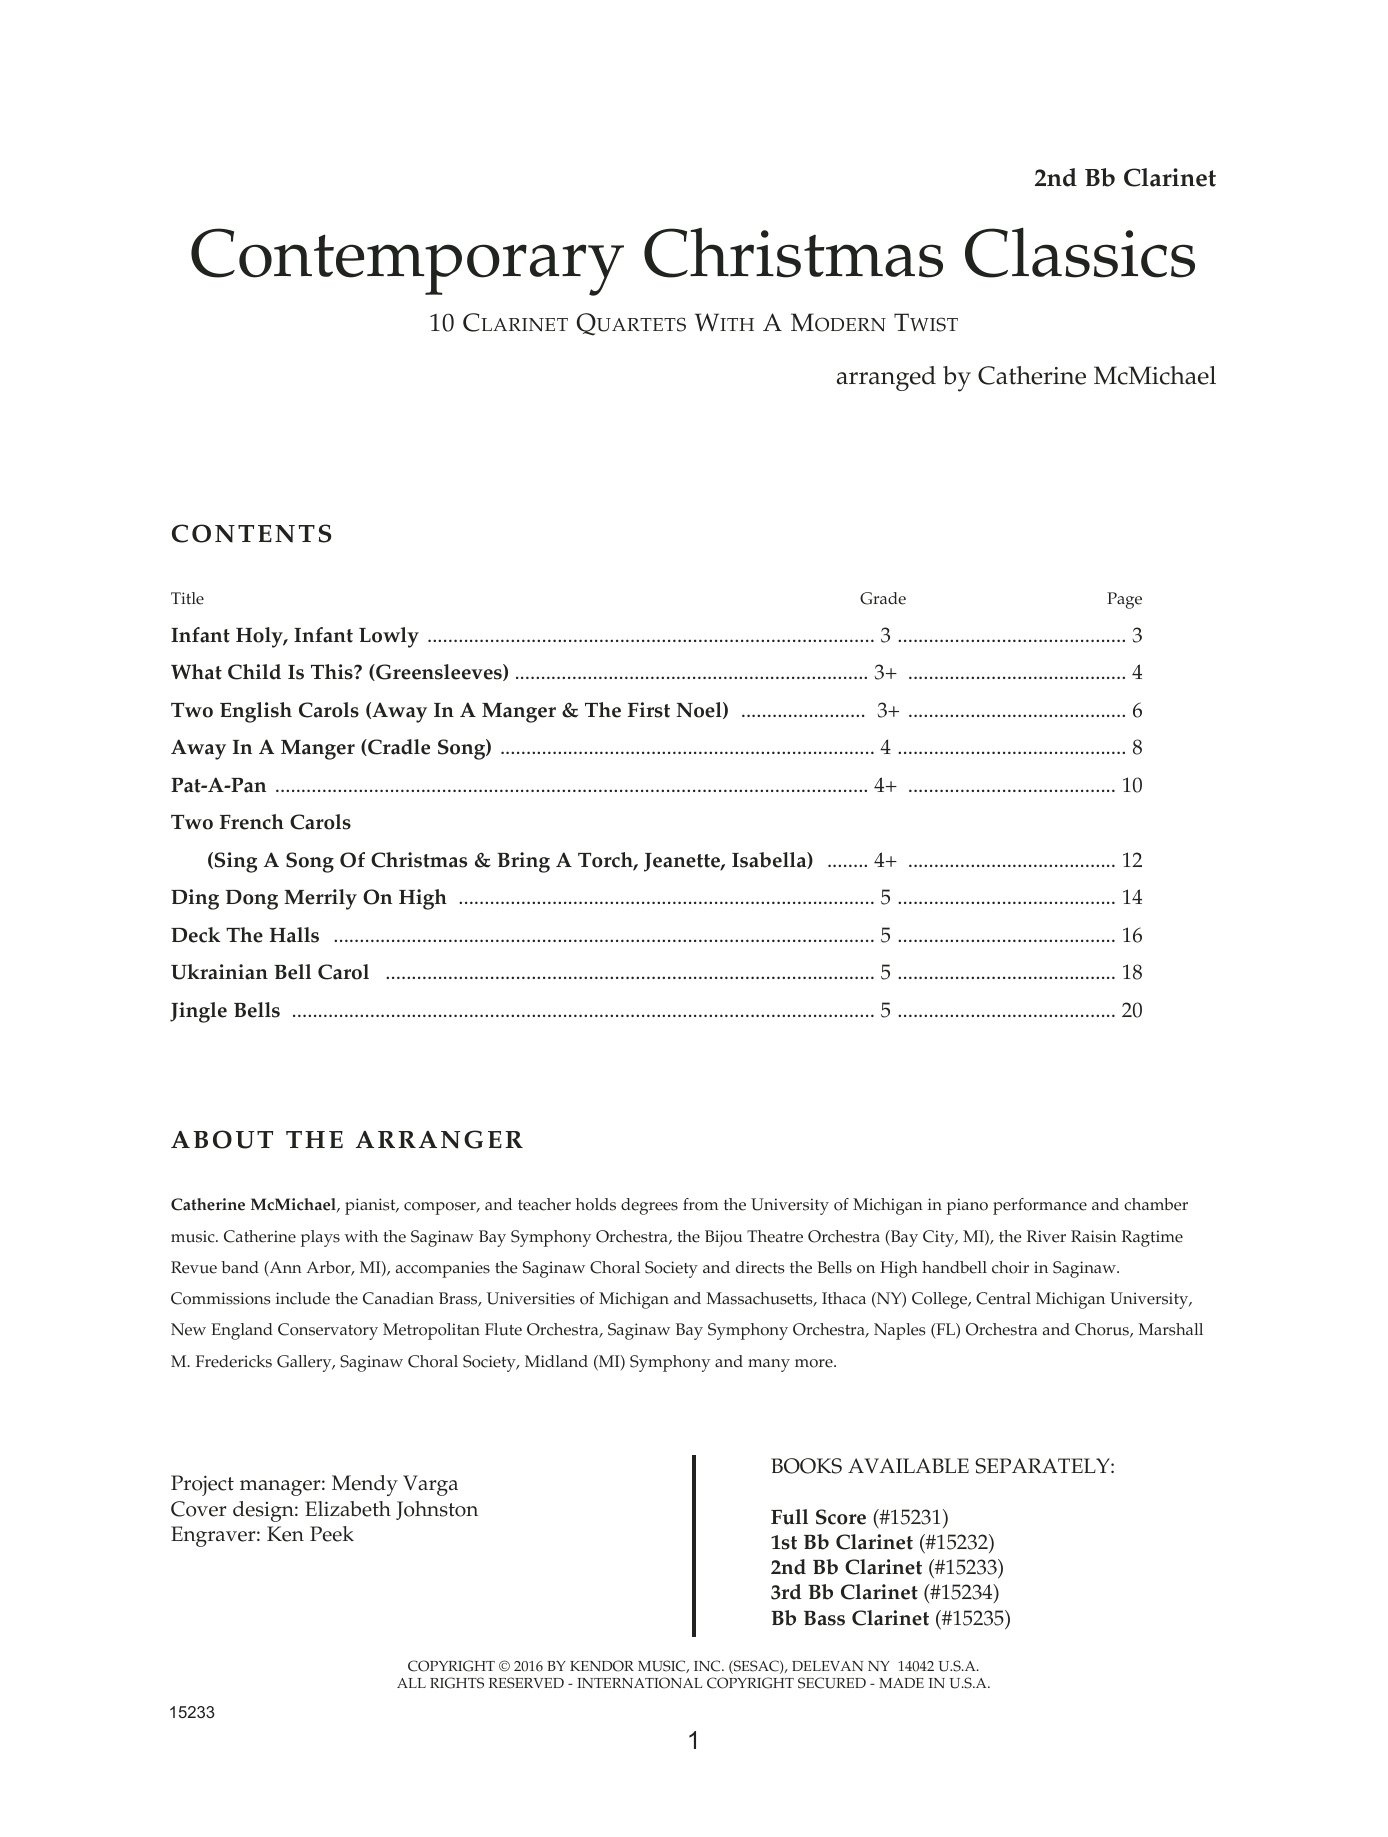 Contemporary Christmas Classics - 2nd Bb Clarinet (Woodwind Ensemble) von Catherine McMichael